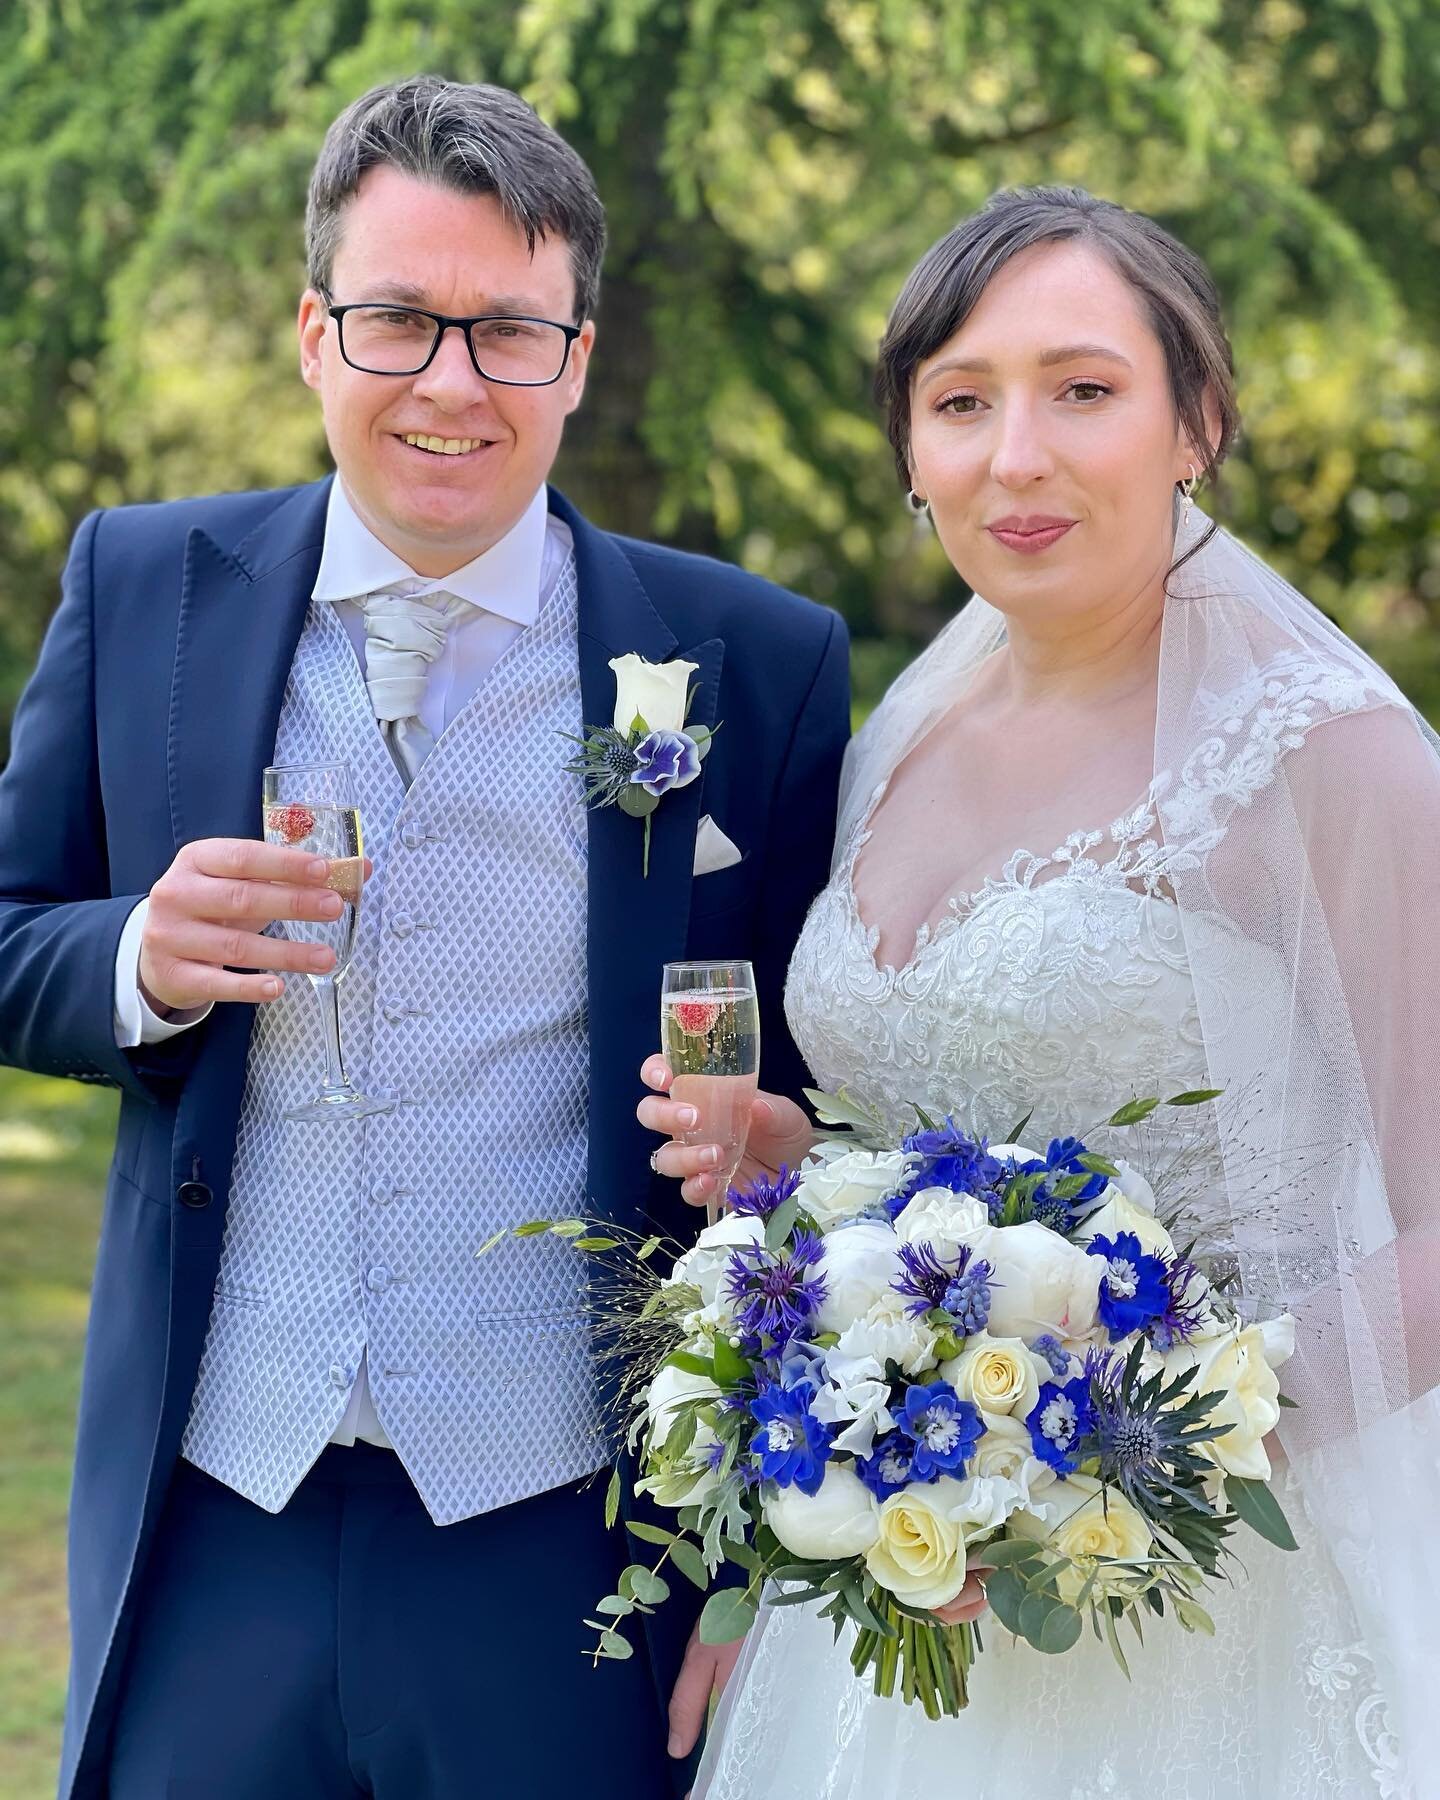 Massive Congratulations to Rosie &amp; Matt these two beautiful people were married yesterday at fabulous @bartlehallhotel our Bride carried a bouquet of entirely fresh and fragrant Roses, Peonies, Delphiniums, Cornflowers, Forget me Nots, Love in th